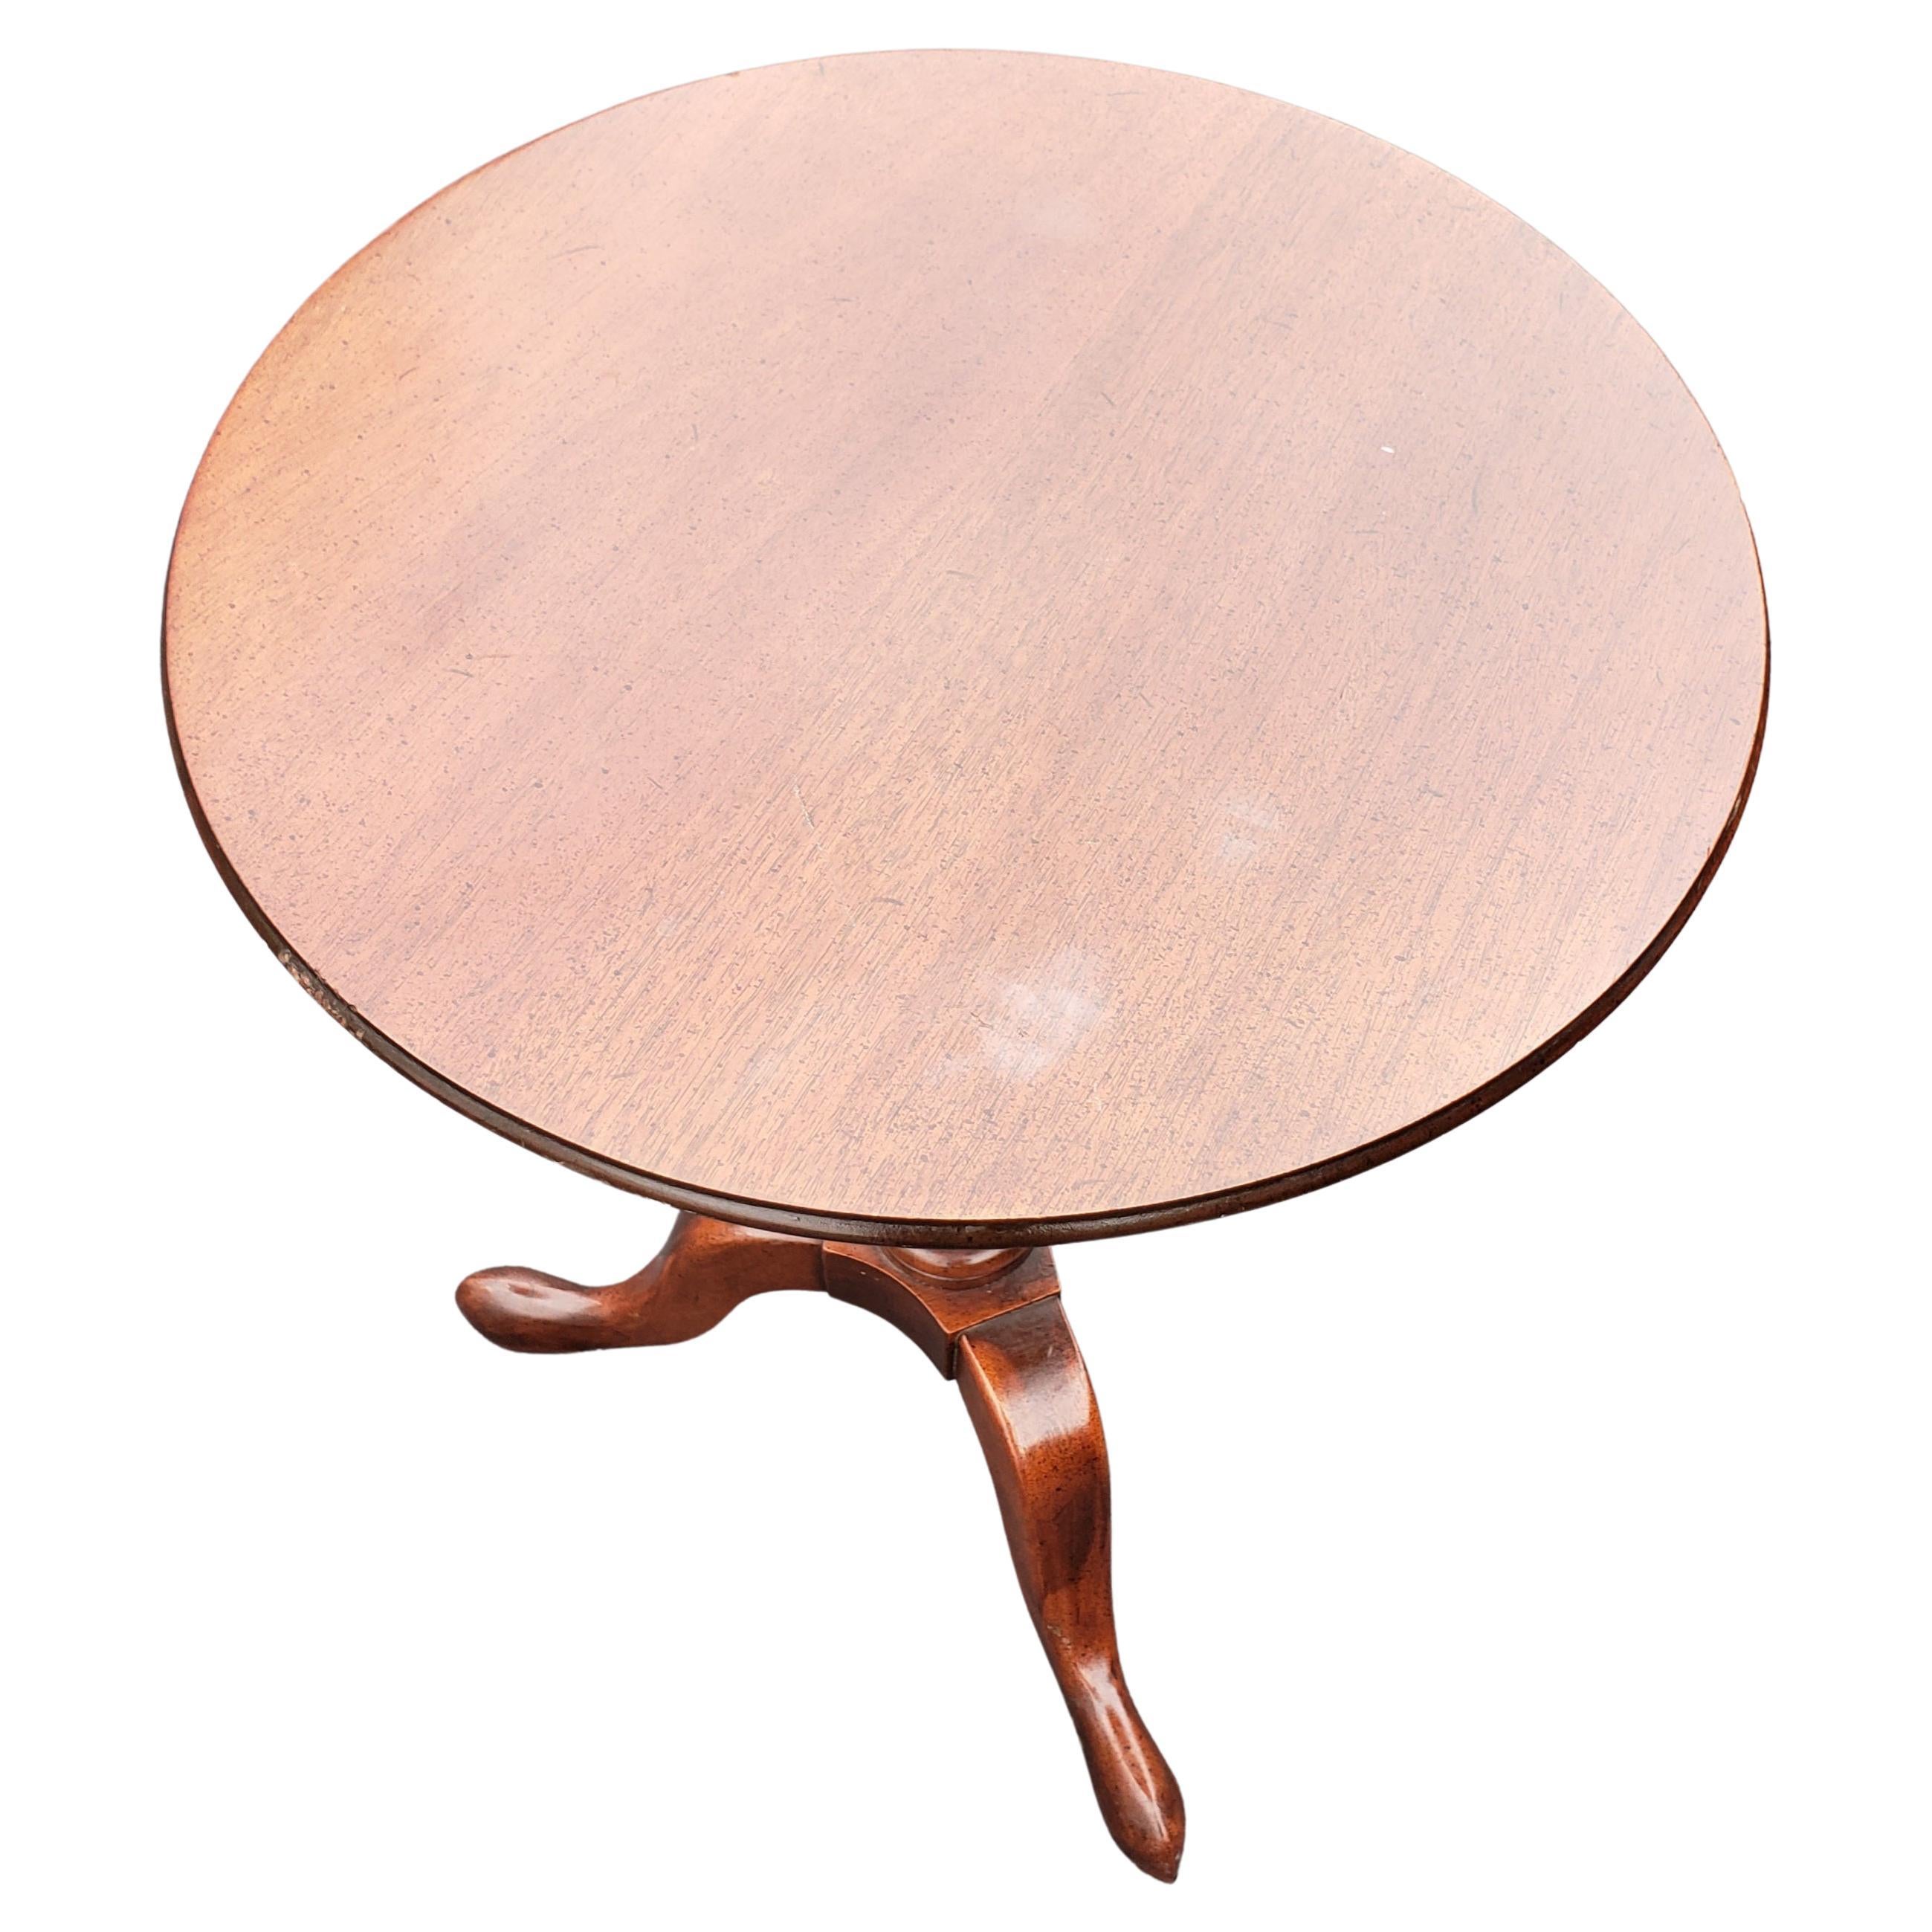 Pennsylvania House solid mahogany occasional tripod side table.
A very good quality Georgian mahogany occasional table Having well figured circular top raised on elegant vase turned central stem terminating on tripod legs And pad feet retaining